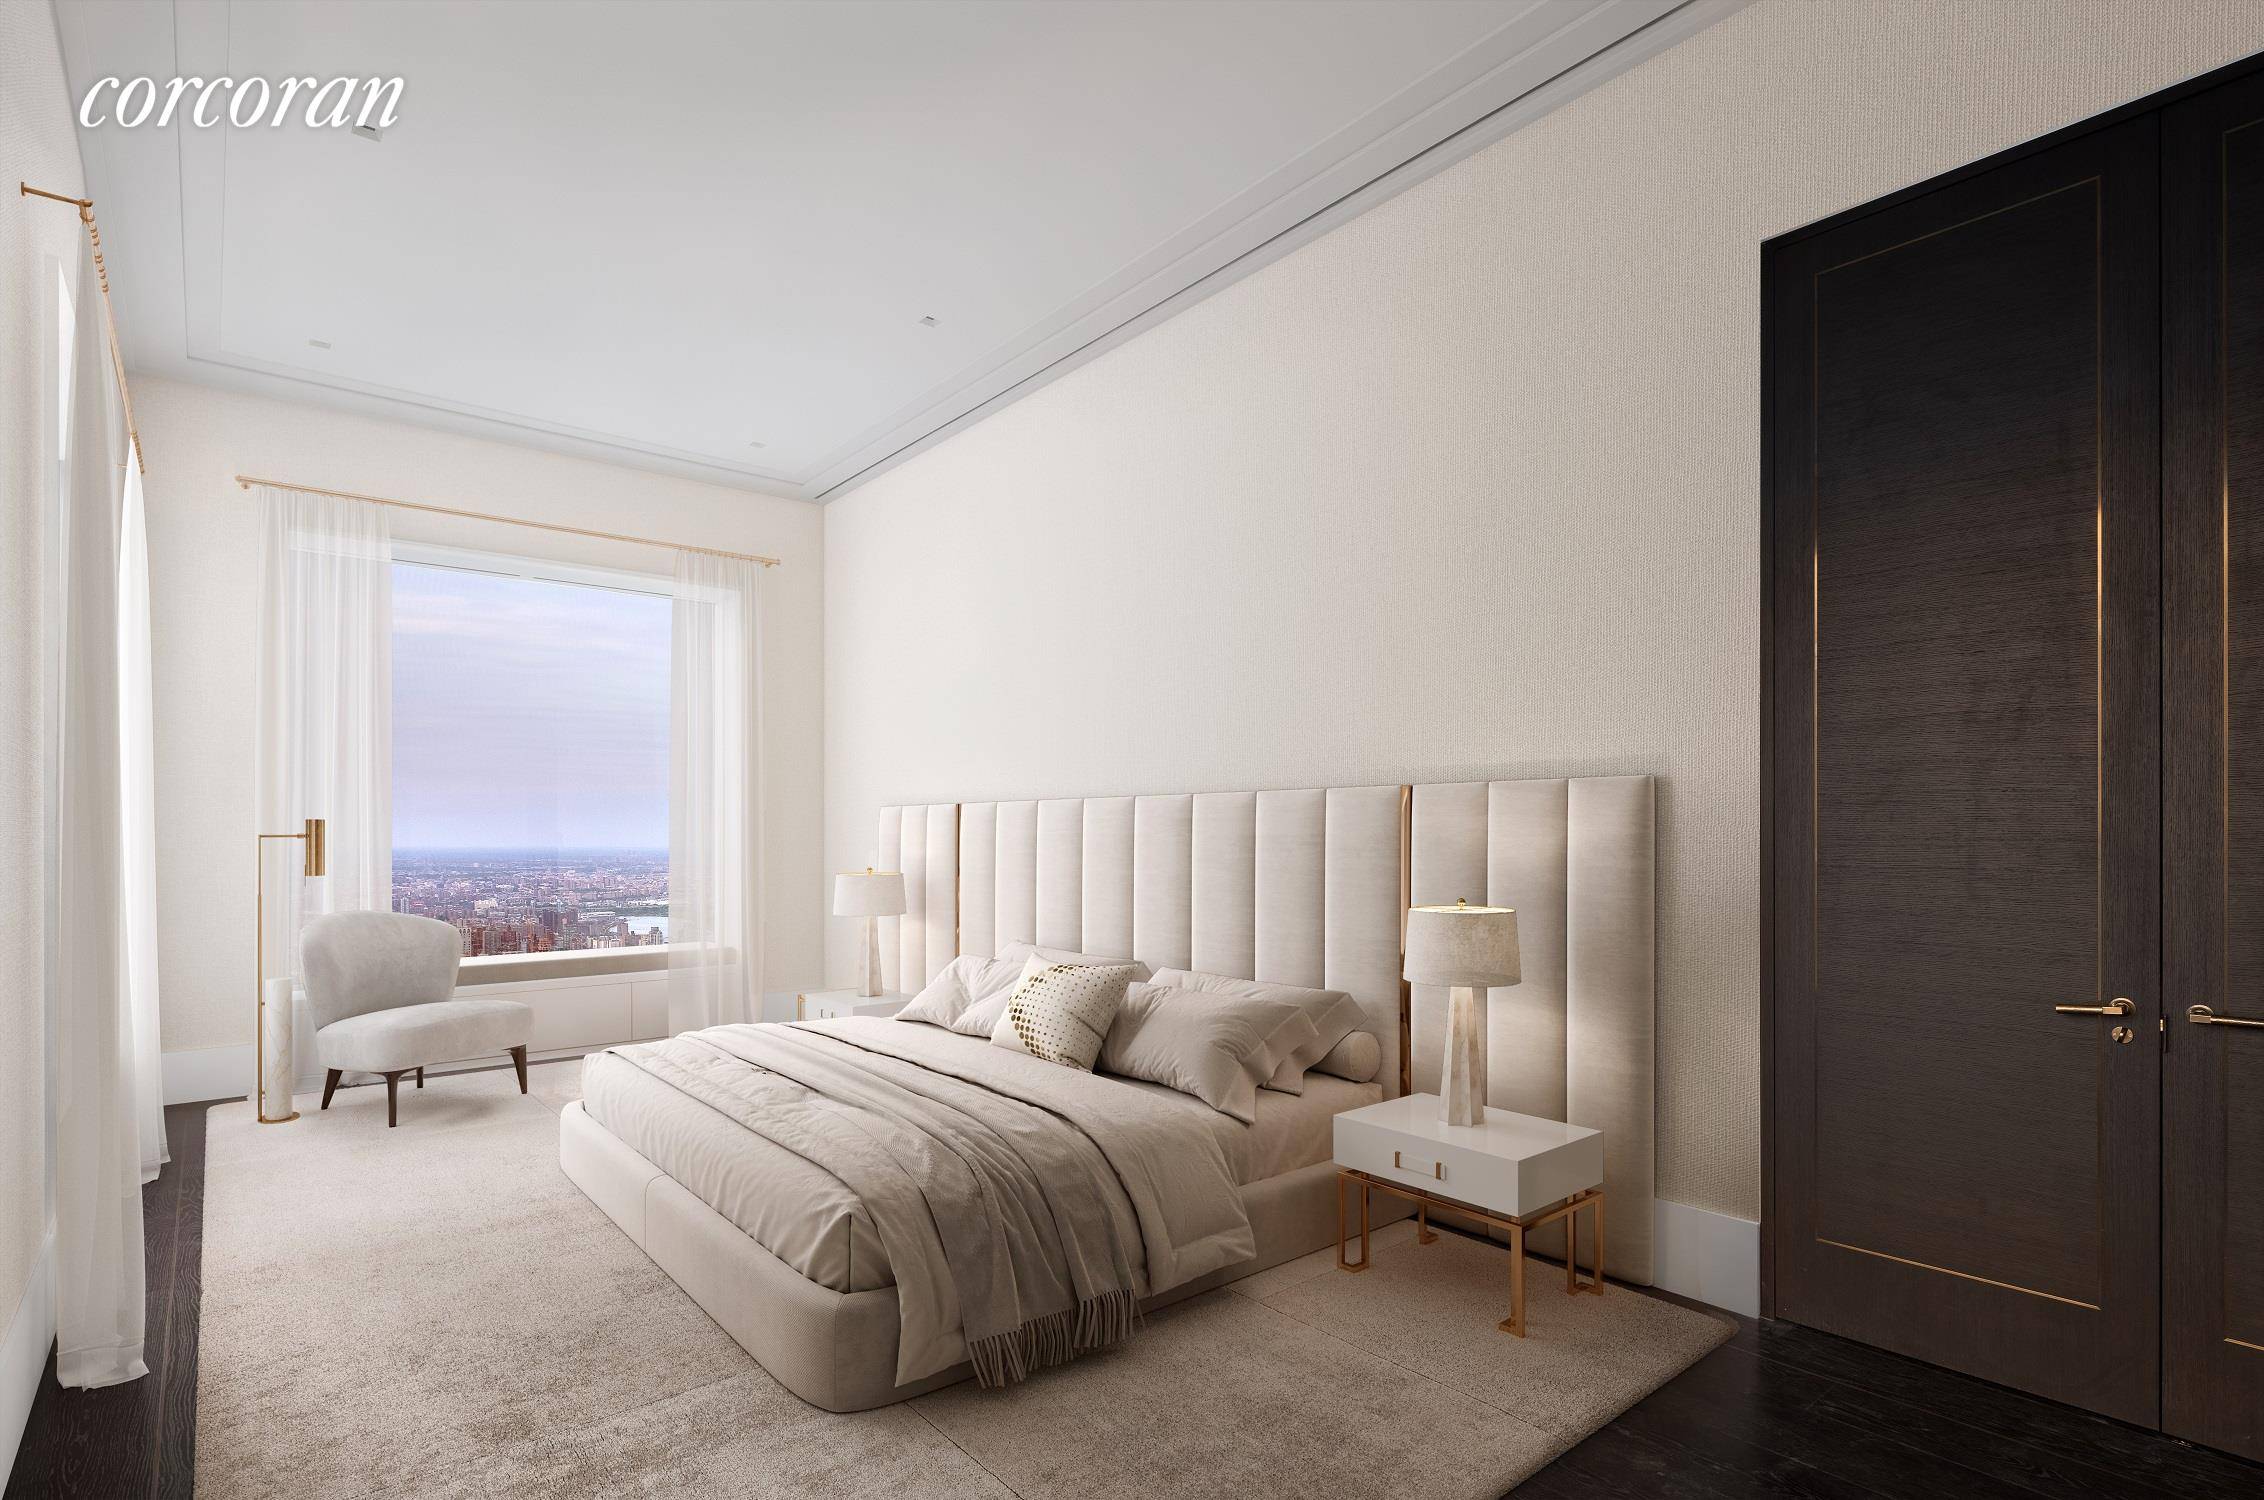 Penthouse 82 at 432 Park AvenueImpeccably Designed and Brand New Full Floor PenthouseVirtually Staged Photography Five Bedrooms Six Baths Two Powder Rooms 8, 054 sqftPenthouse 82 at 432 Park Avenue ...